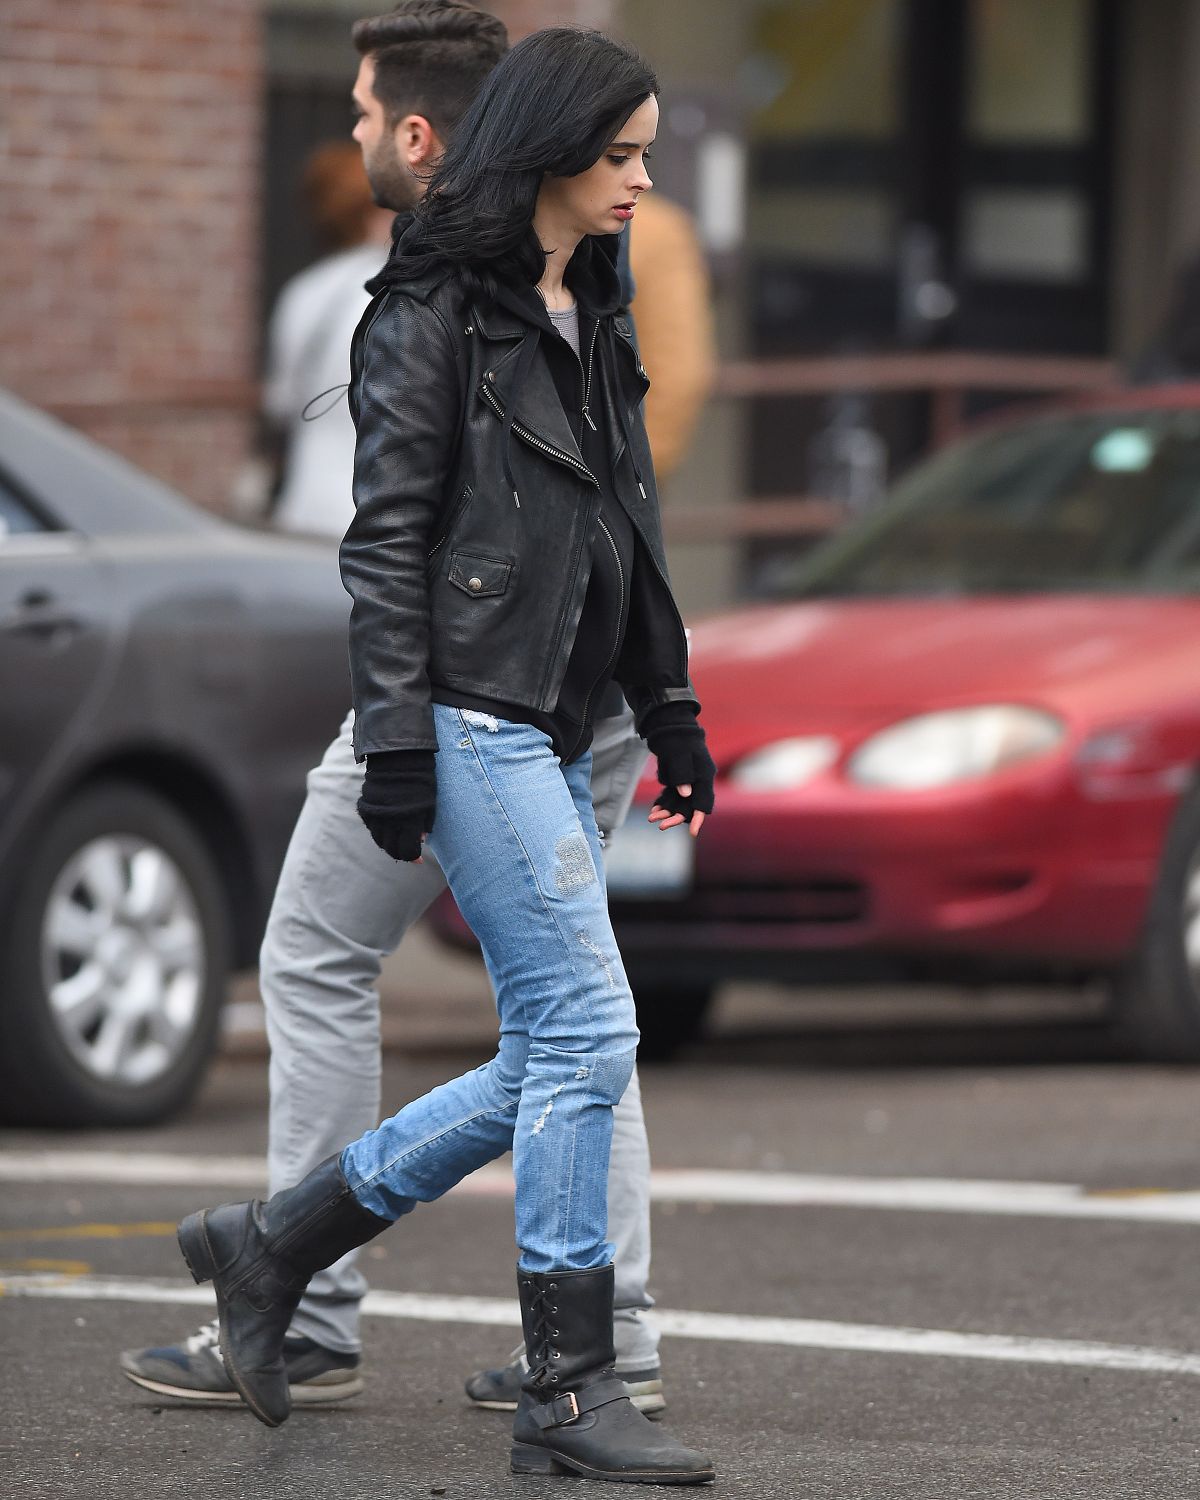 KRYSTER RITTER on the Set of A.K.A. Jessica Jones in New York – HawtCelebs